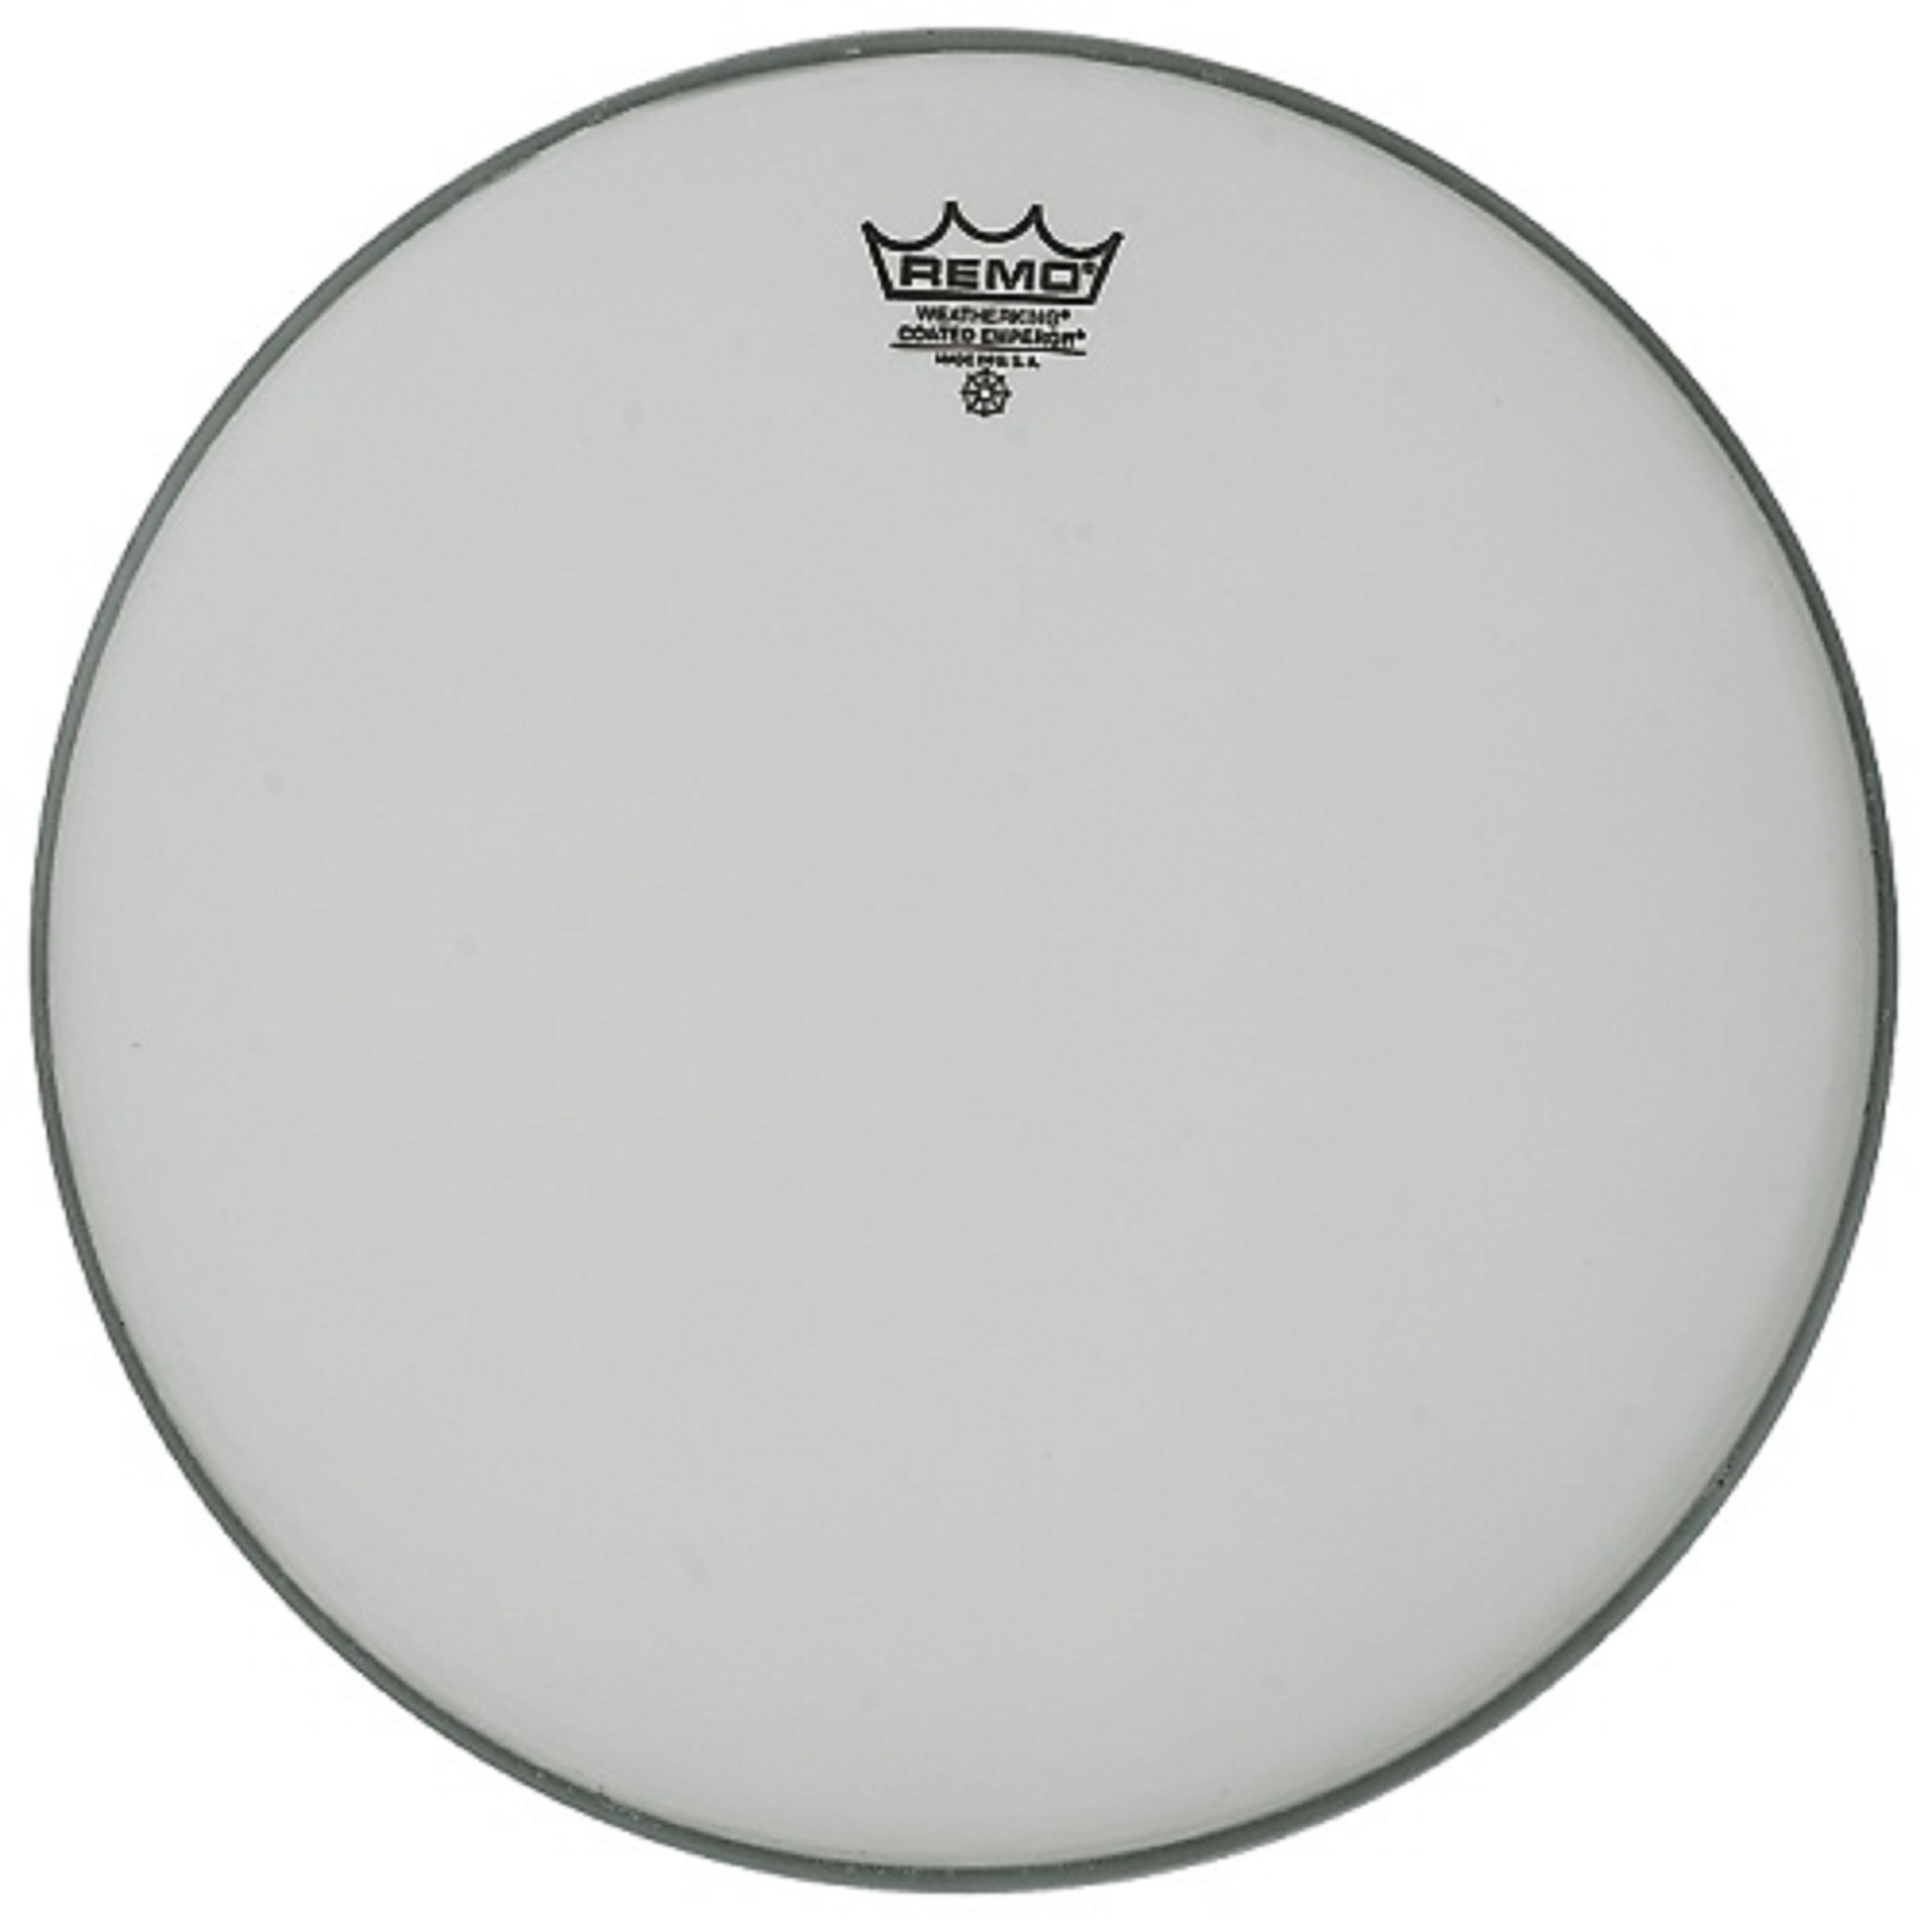 Remo Fell Emperor 16" Coated